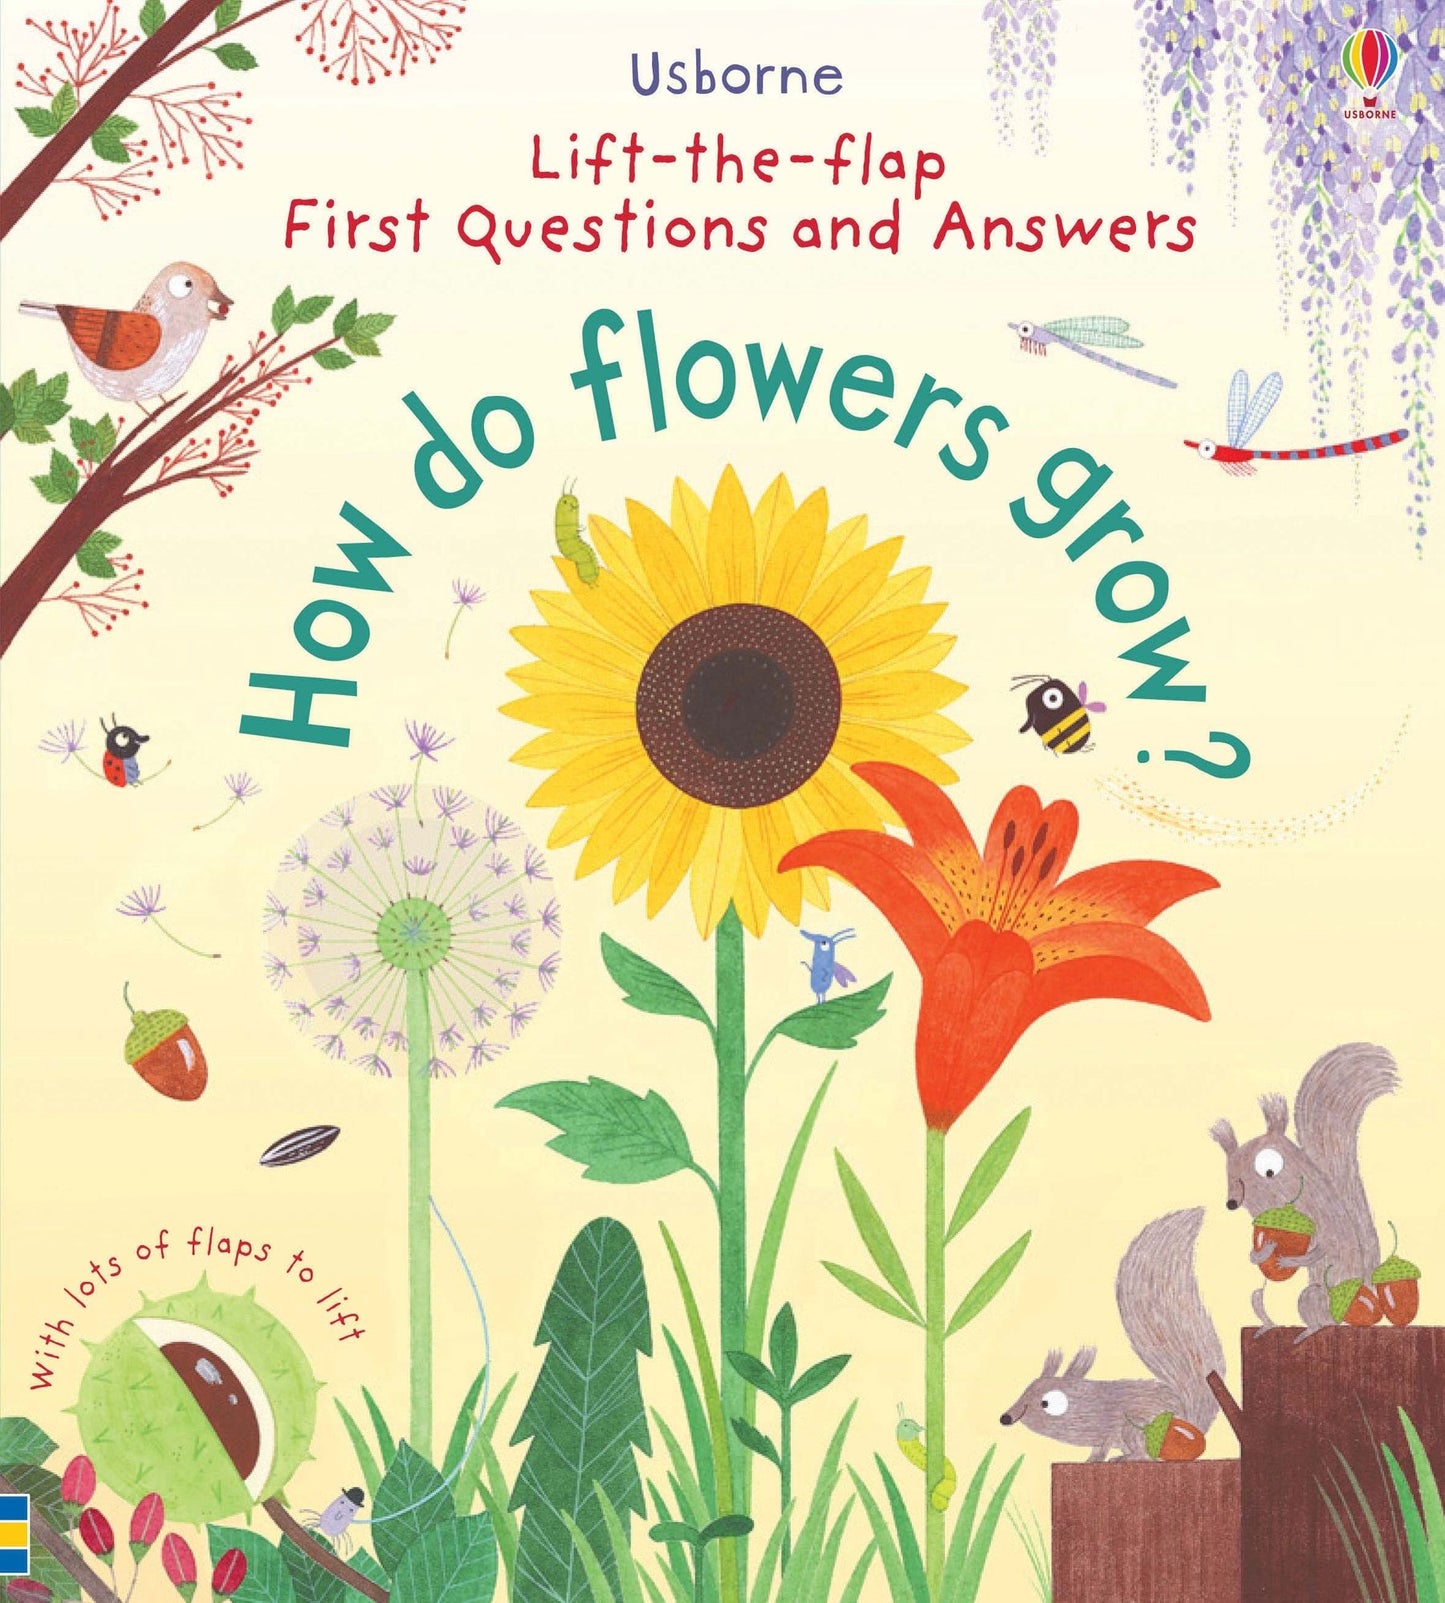 First Questions: How Do Flowers Grow?